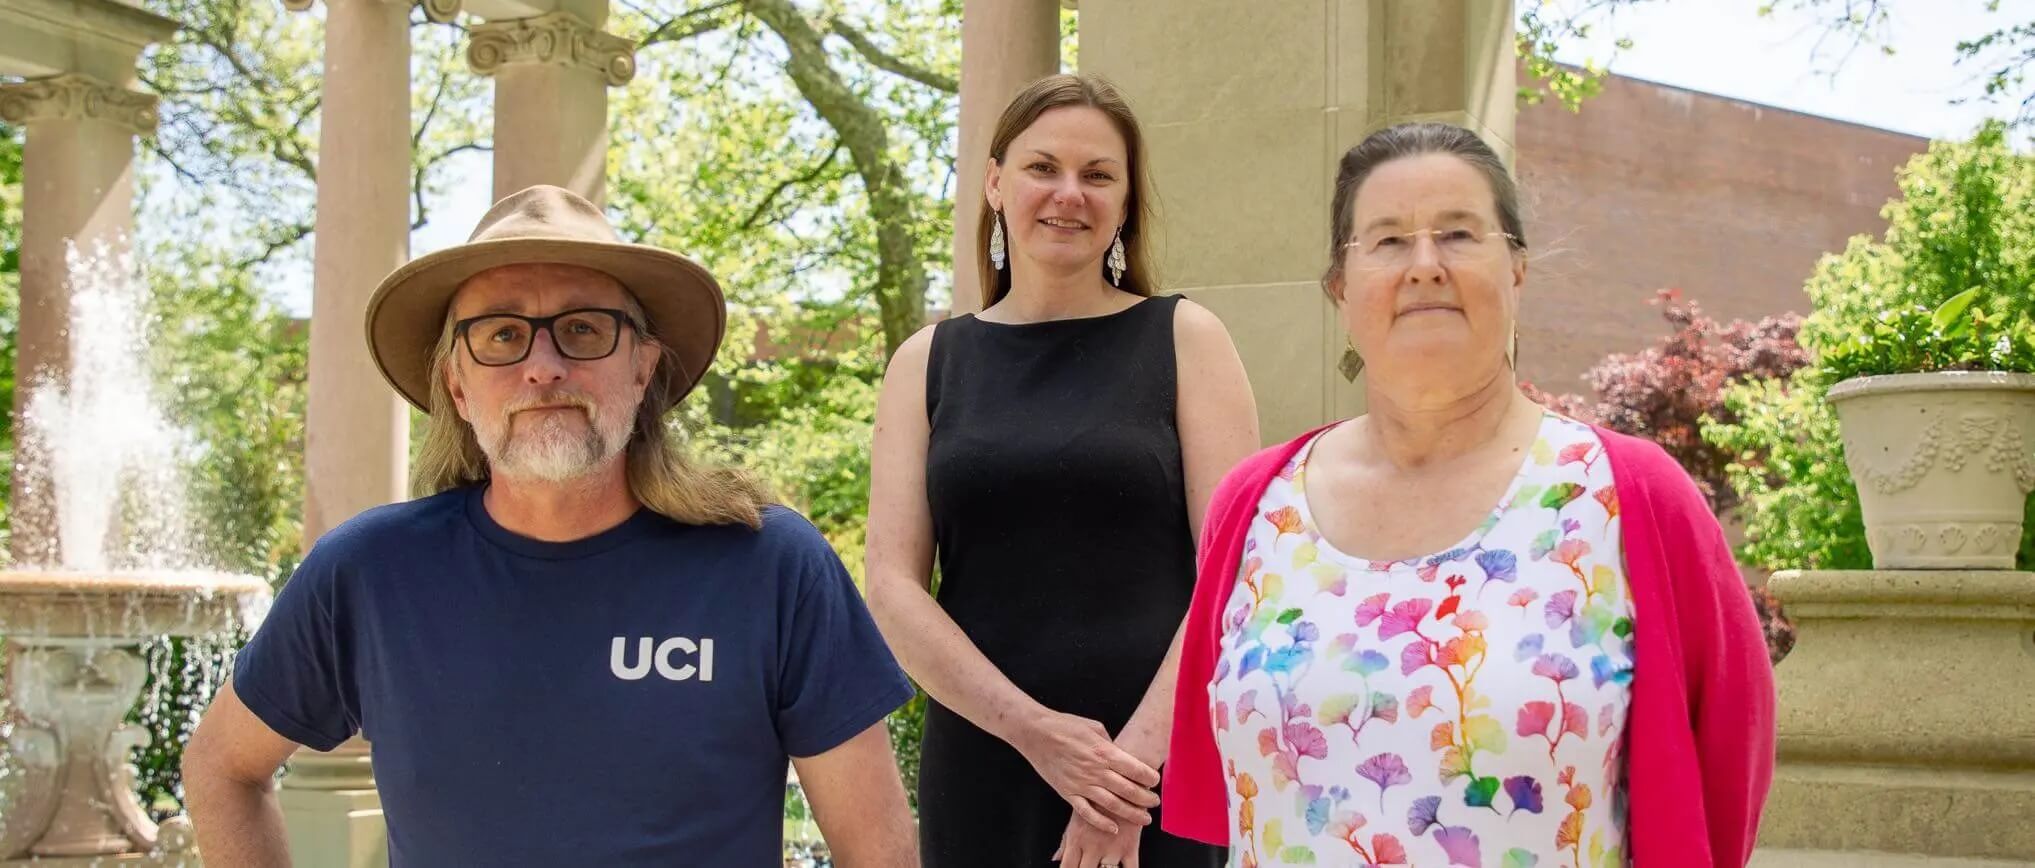 Professors Peter Jacques, Michelle Schpakow, Ed.D., and Catherine Duckett, Ph.D., posing together in Erlanger Gardens.